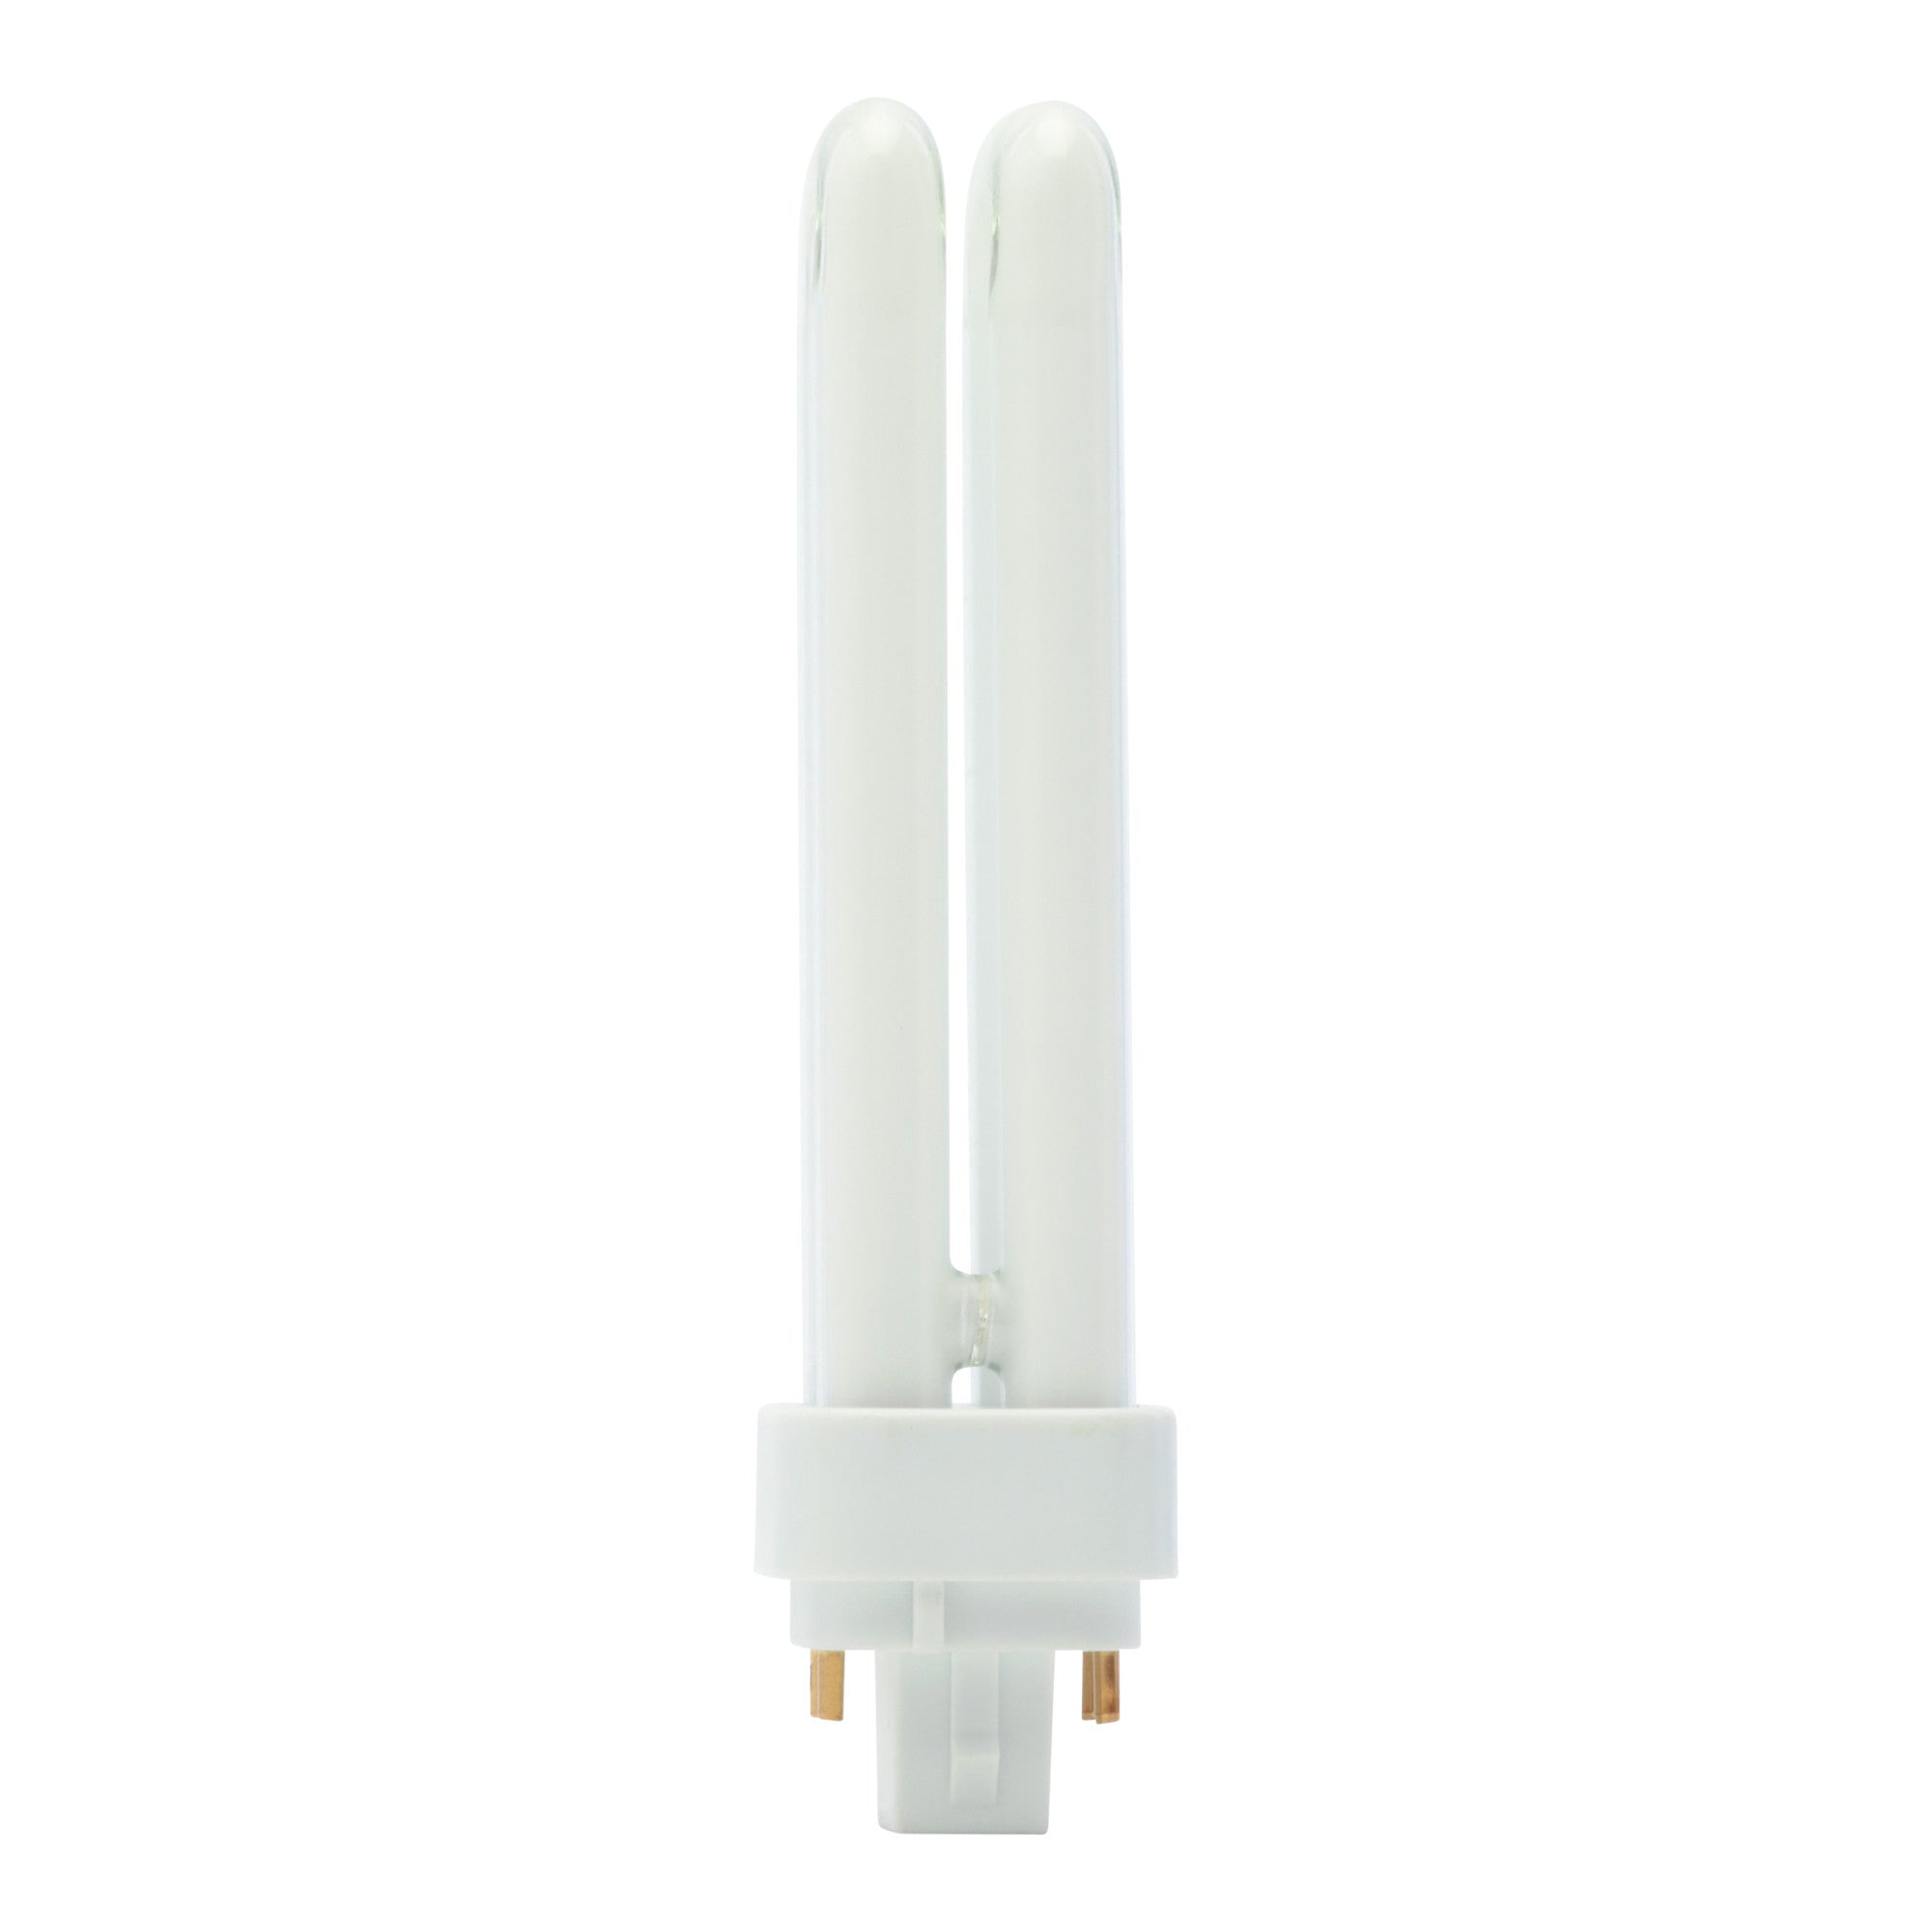 18W Soft White (2700K) G24Q-2 Double Twin Tube PL Non-Dimmable CFL Lig